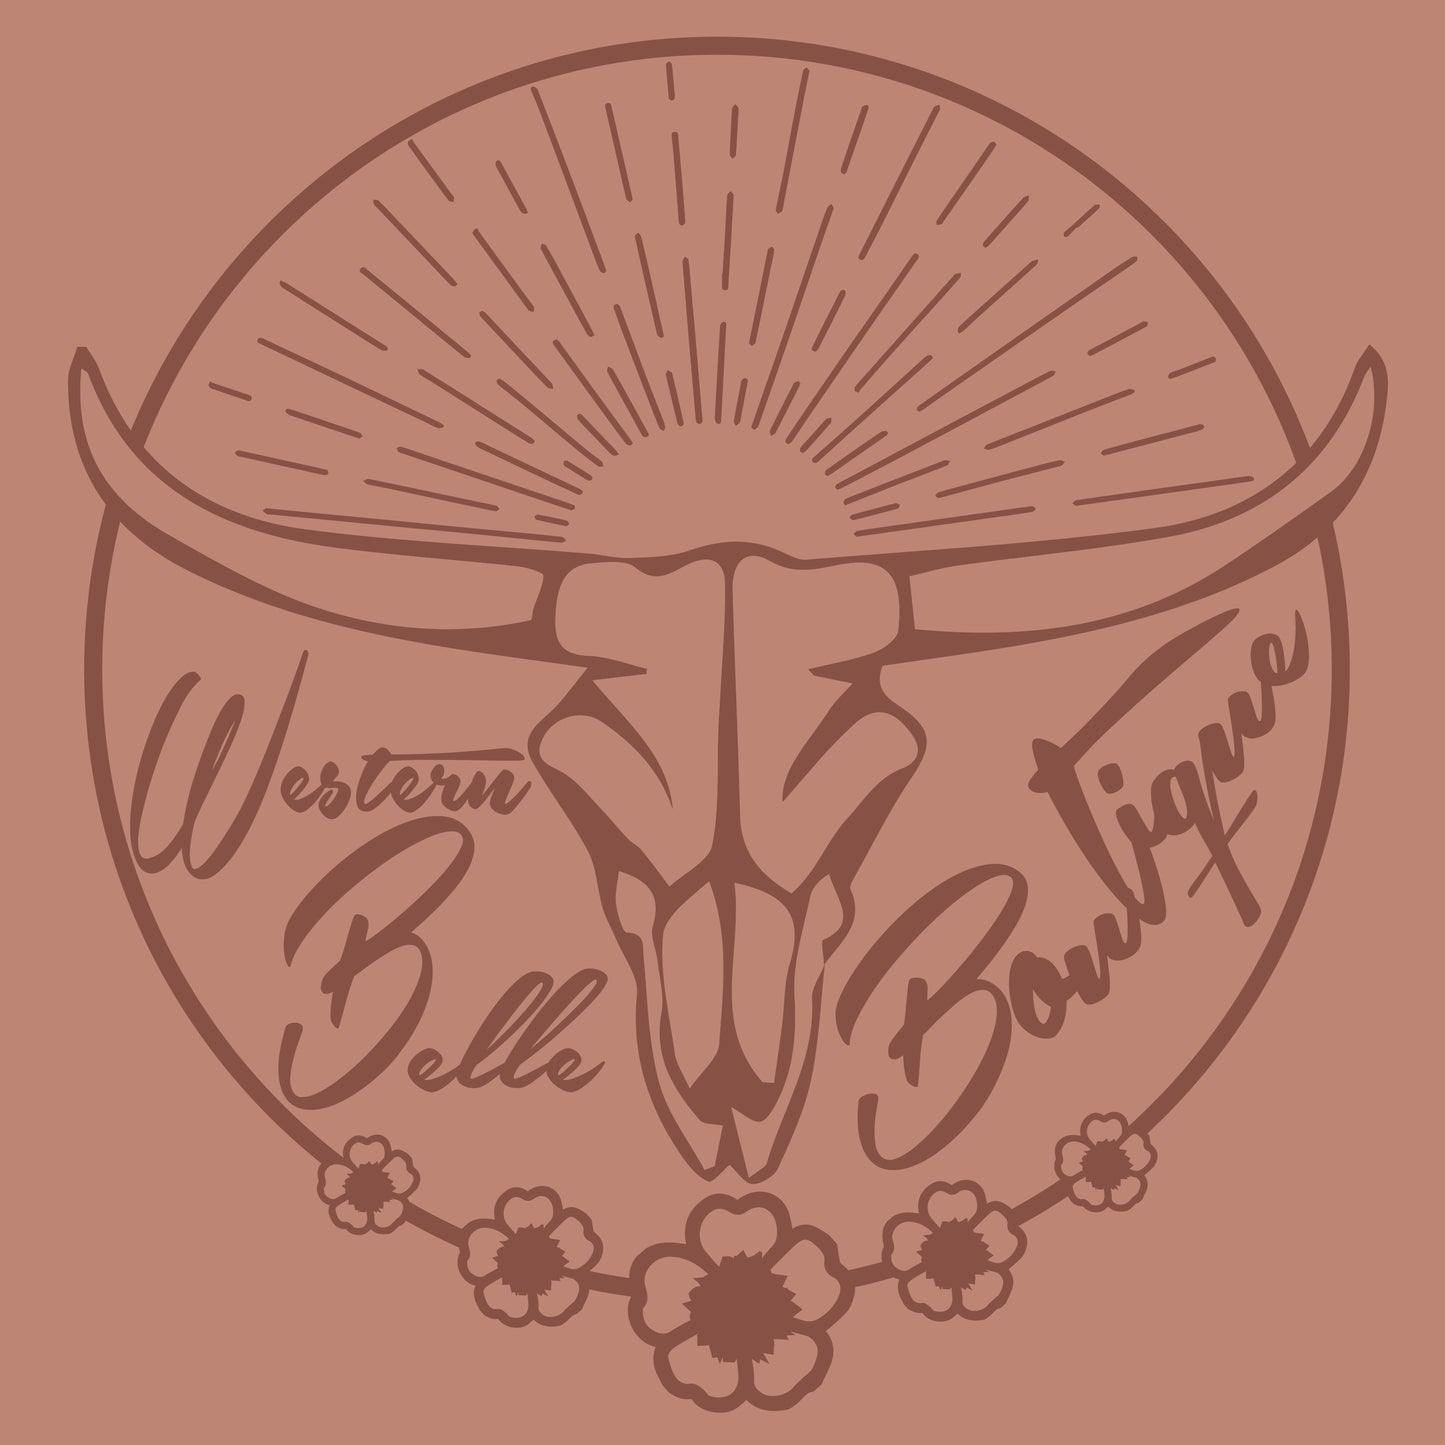 Western Belle Boutique Gift Card